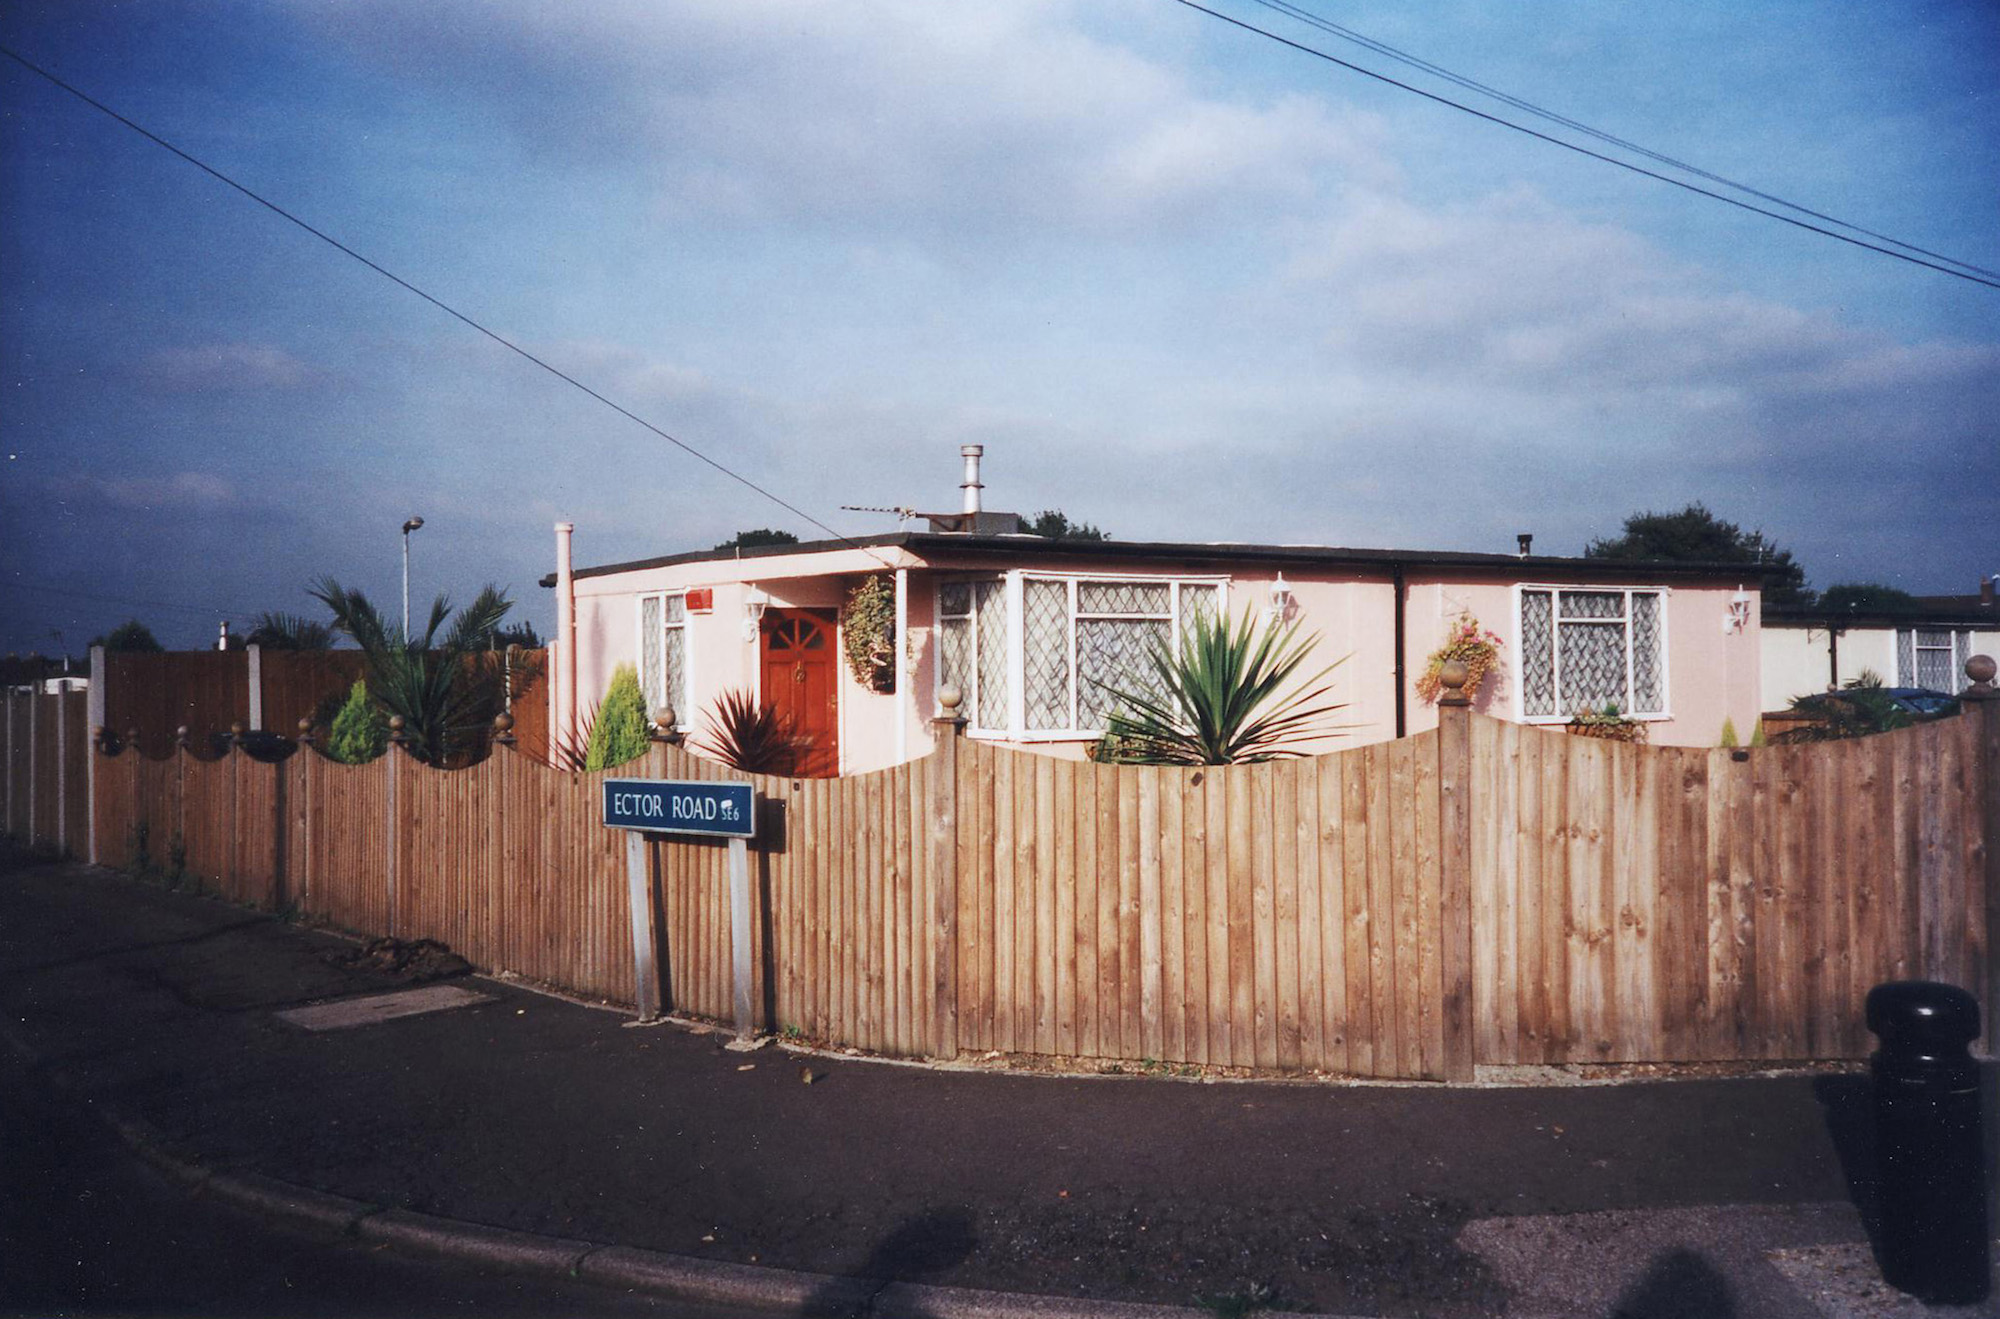 The Catford prefabs estate in South London, 2004. Thousands of post-war prefabs are still being lived in and cherished by their tenants or owners all over the UK. I love prefabs. Some people will think living in a prefab is like living in a box. Yes, it might sound or even look a bit like that but what a lovely, sophisticated box! I am talking about post-war prefabs, erected in a hurry just after the war when Britain was suffering an unprecedented housing shortage. More than 150 000 of these prefabricated houses were erected all over the UK mainly ins small estates. They were luxury to most of the residents who mainly were service men coming back from the war and reuniting with their family. Their prefab became their little castle with all mod cons and even more than any working class could hope for at the time: hot water, toilets inside, a fitted kitchen with a gas fridge and a garden all around the house. Part of the temporary housing programme, they were not supposed to last over a decade. Yet, over 70 years later, a few Thousands are still standing and very much loved. Why do people love their prefab so much, why are they so attached to their "cardboard or tin boxes"? Is it the layout of the prefab, the design of the interior, the garden around? Is the sense of community they created? Or a combination of everything?That's what I have been trying to find out for the last 11 years, since I started taking pictures of prefabs in South London. I have travelled all over the UK, from Redditch to Newport, Chesterfield, Catford and even on the Isle of Lewis to try to draw some answers. I have met wonderful people and come back with their portraits and their moving stories. Here they are for you to discover through this project.